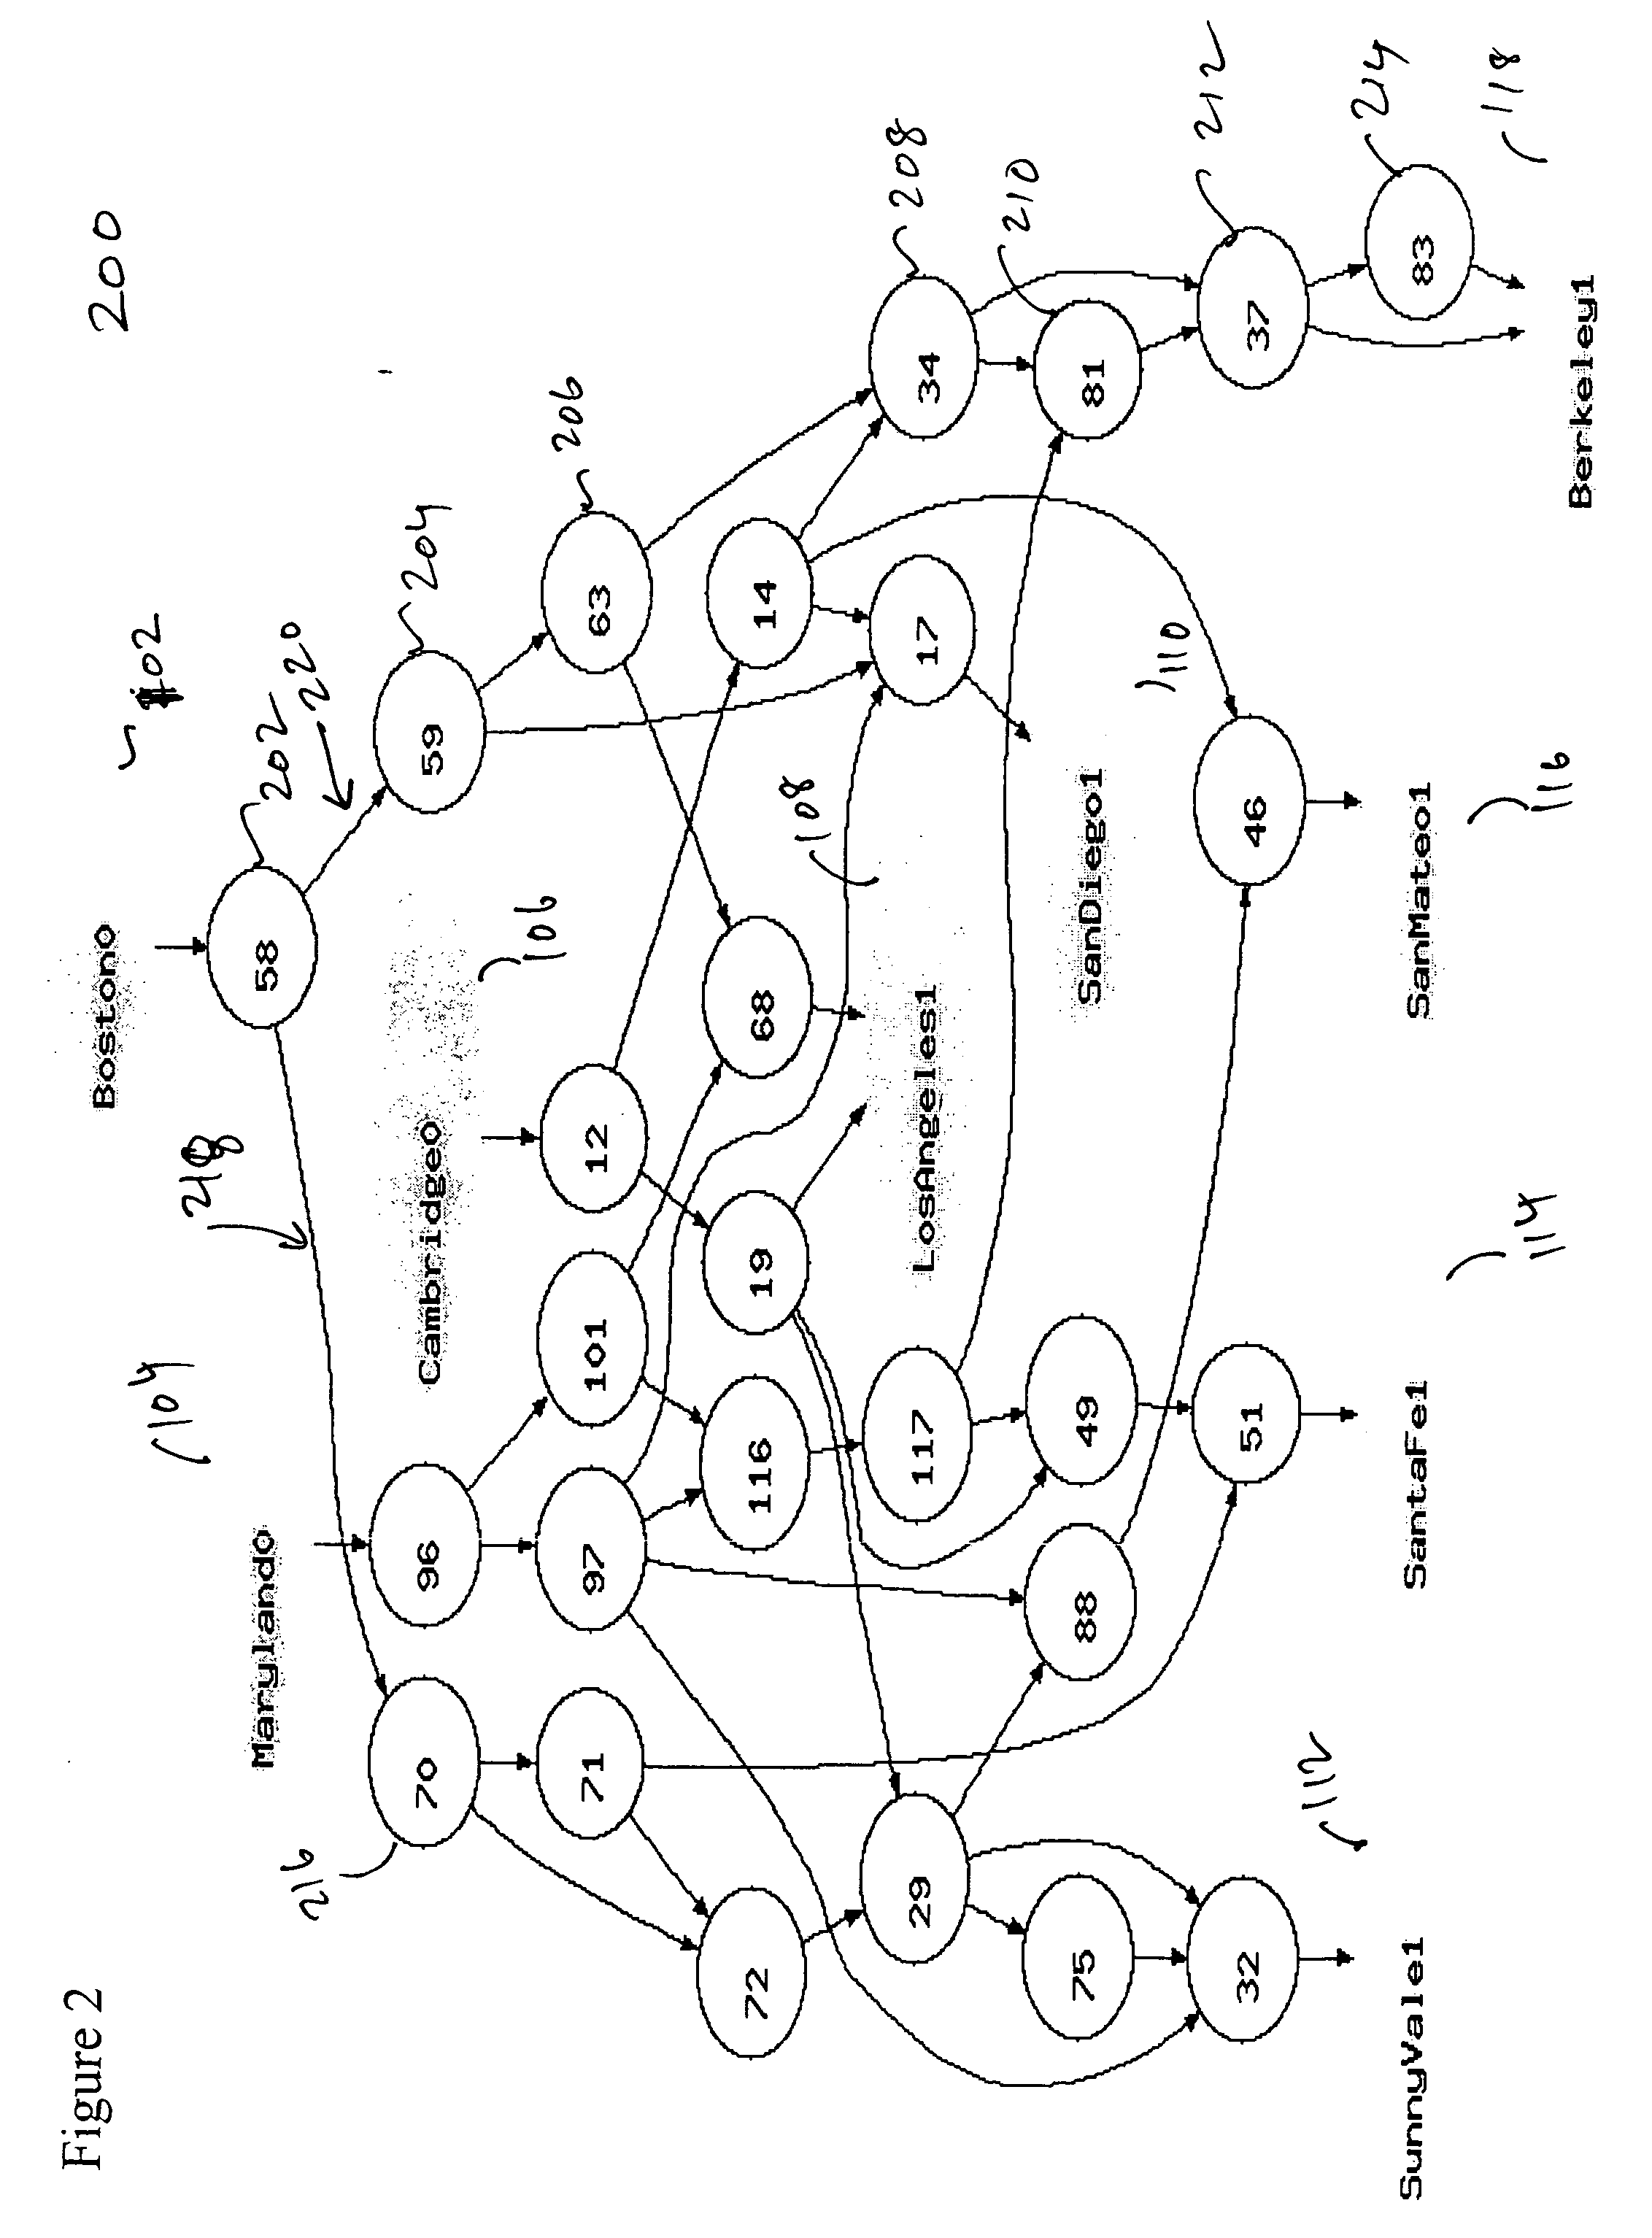 Method and system for generating an annotated network topology